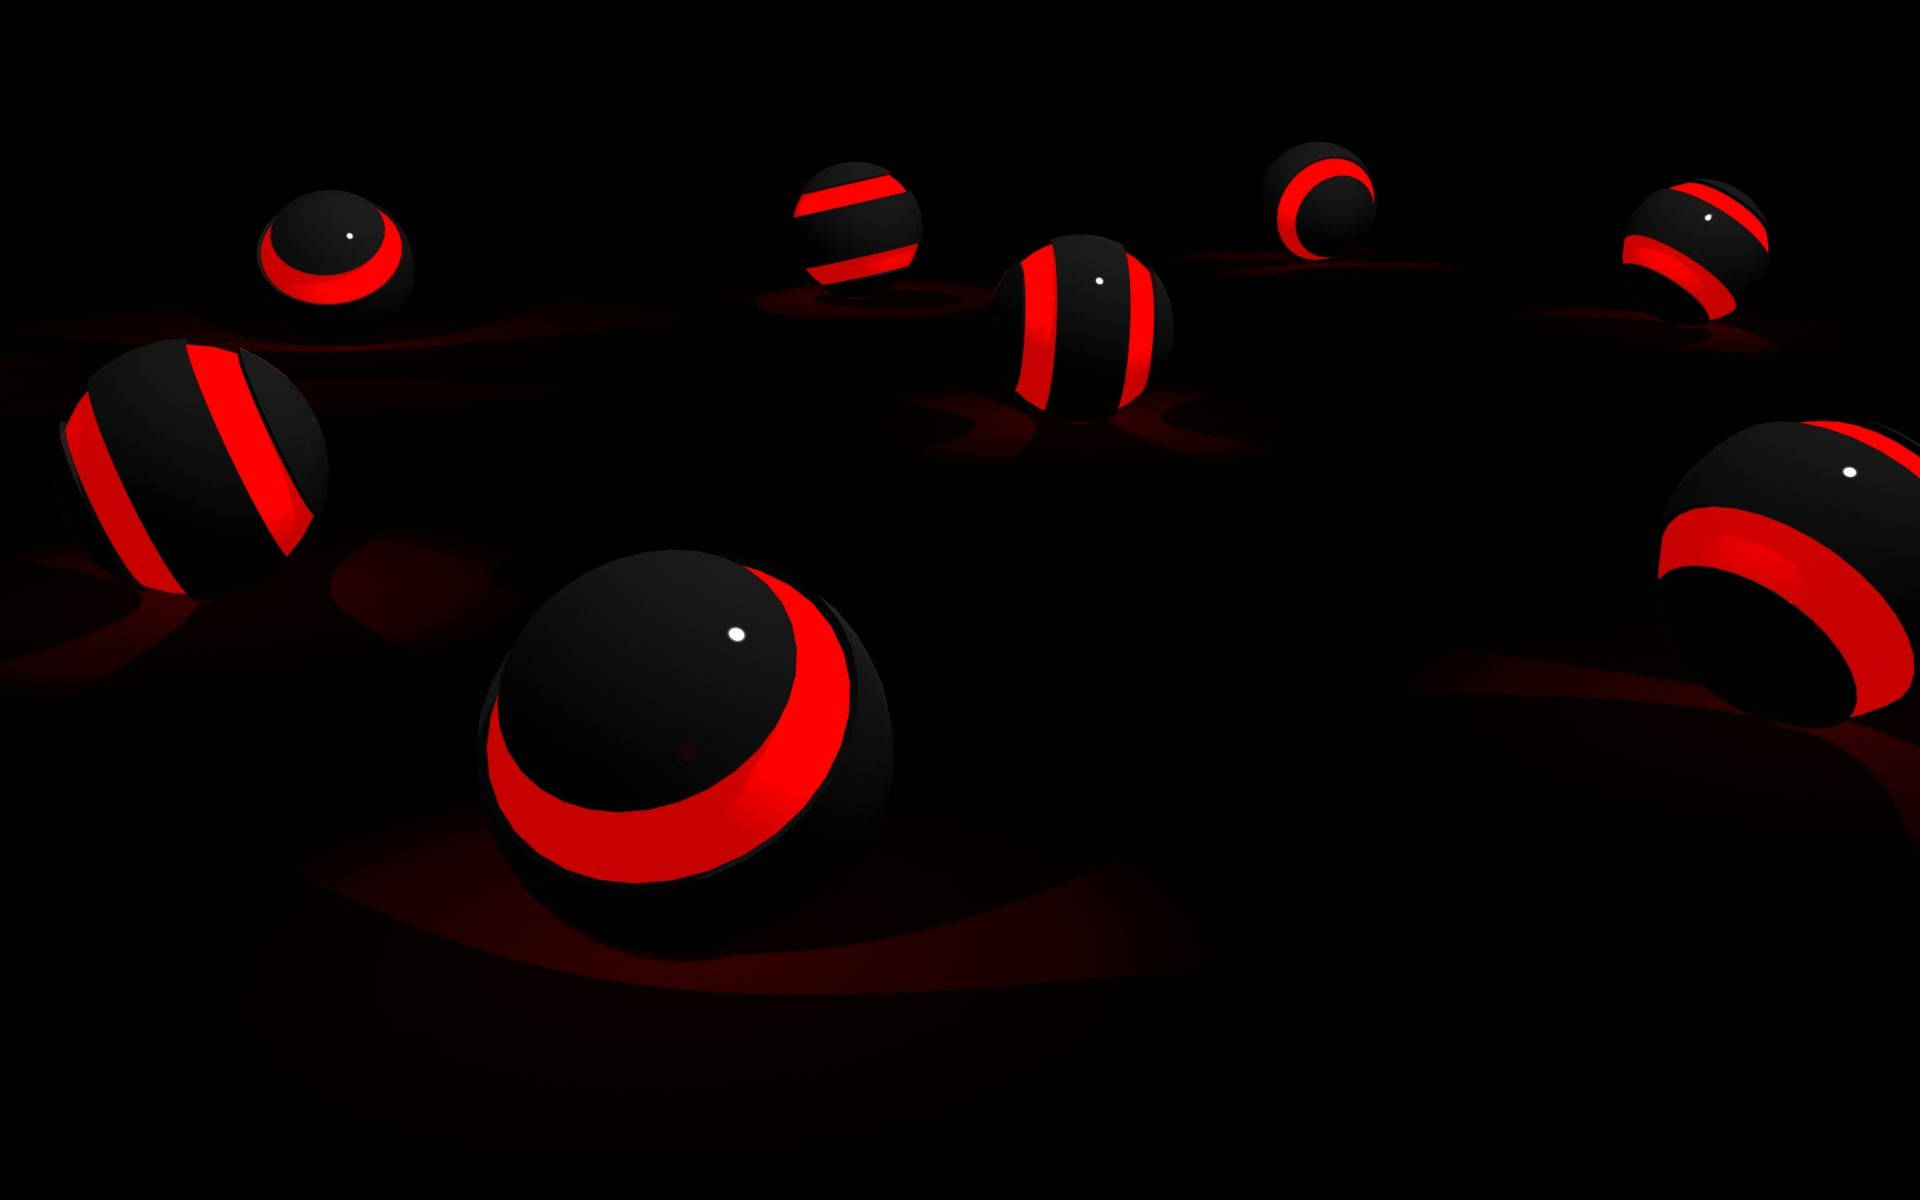 Red And Black 3d Spheres Background